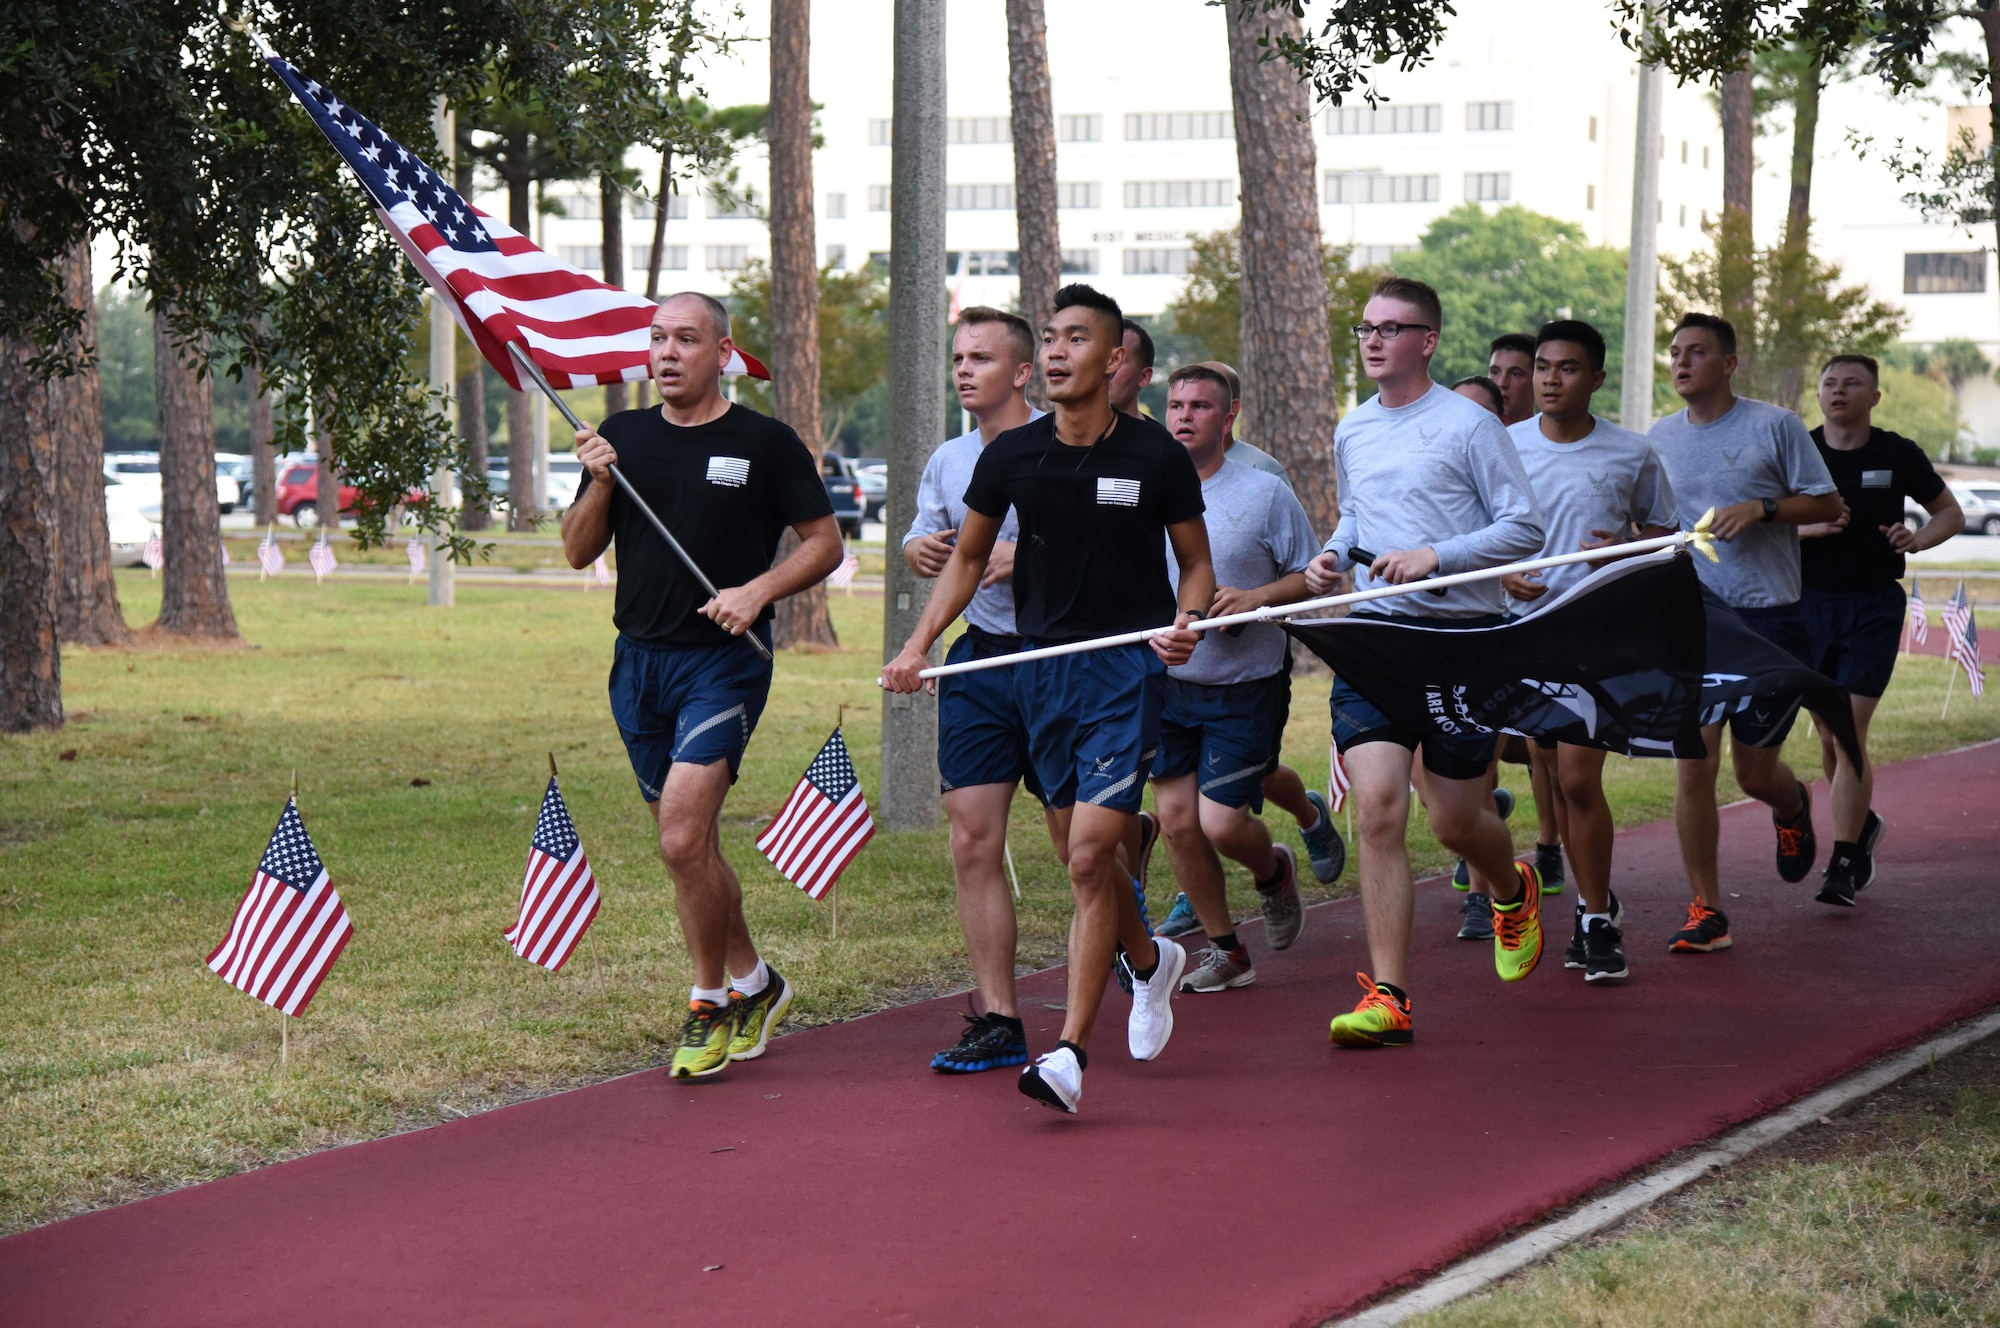 Members of the 81st Communications Squadron run the final laps during Keesler’s POW/MIA 24-hour memorial run and vigil at the Crotwell Track Sept. 14, 2017, on Keesler Air Force Base, Mississippi. The event was held to raise awareness and pay tribute to all prisoners of war and those military members still missing in action. (U.S. Air Force photo by Kemberly Groue)